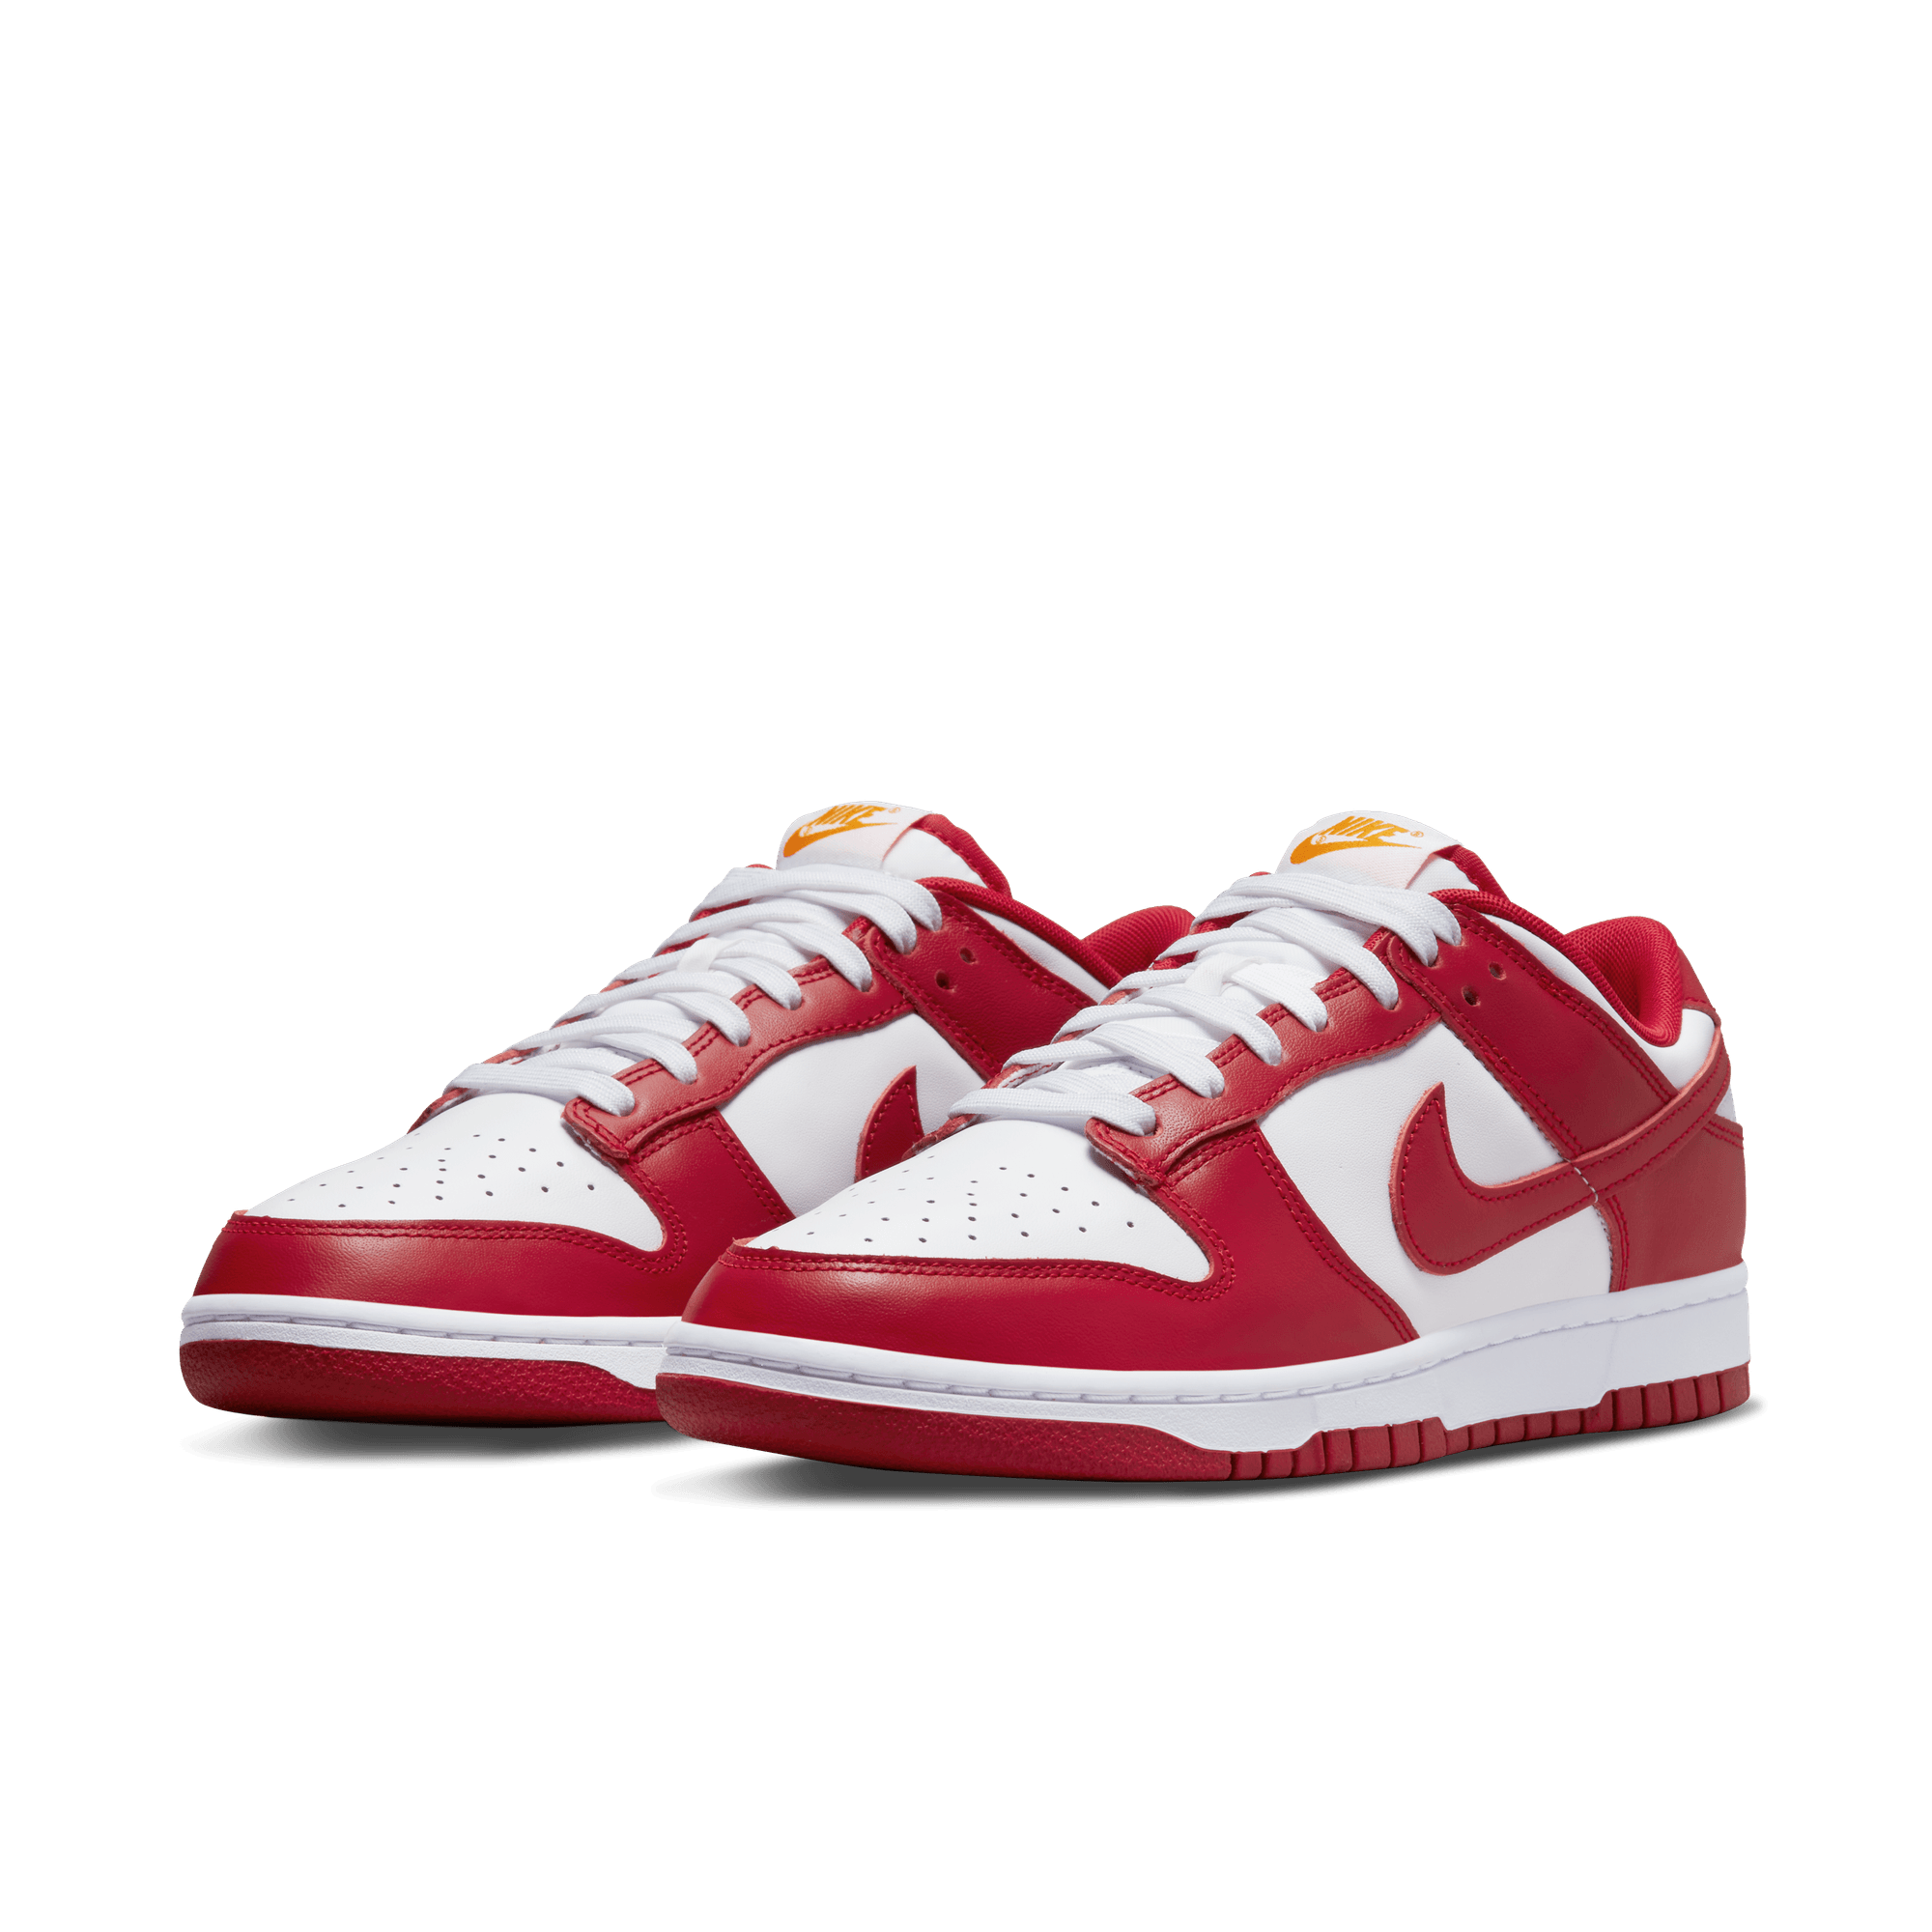 DUNK LOW RETRO "GYM RED"